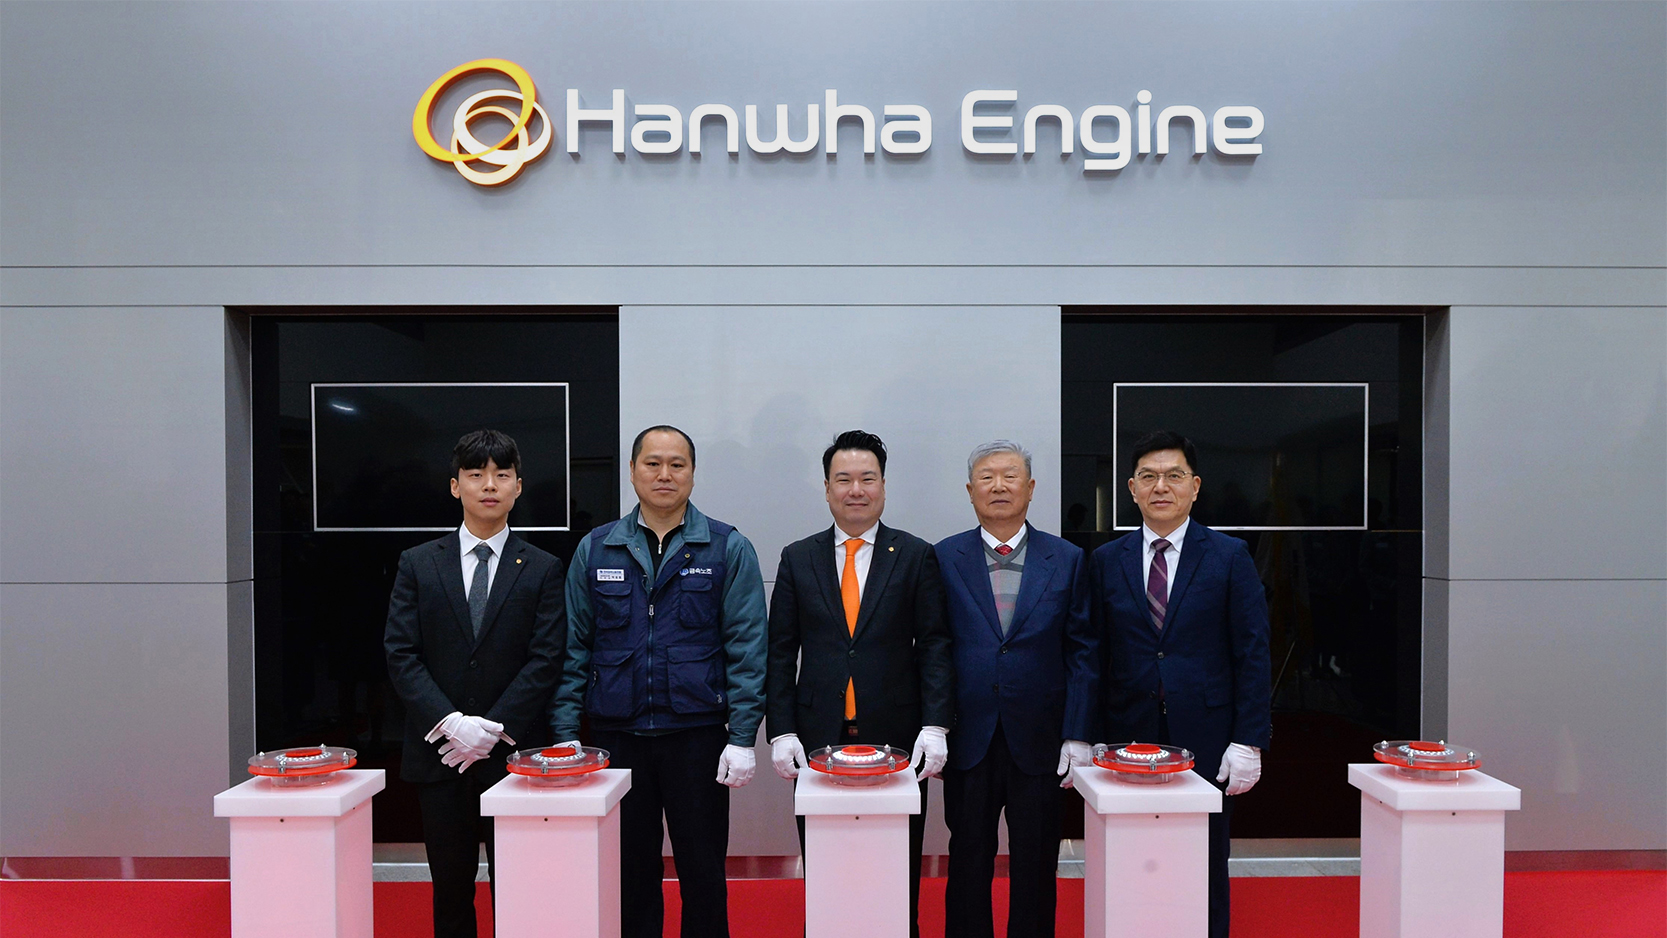 Five Hanwha Engine representatives pose for a photo in front of the company logo at an event celebrating its launch.